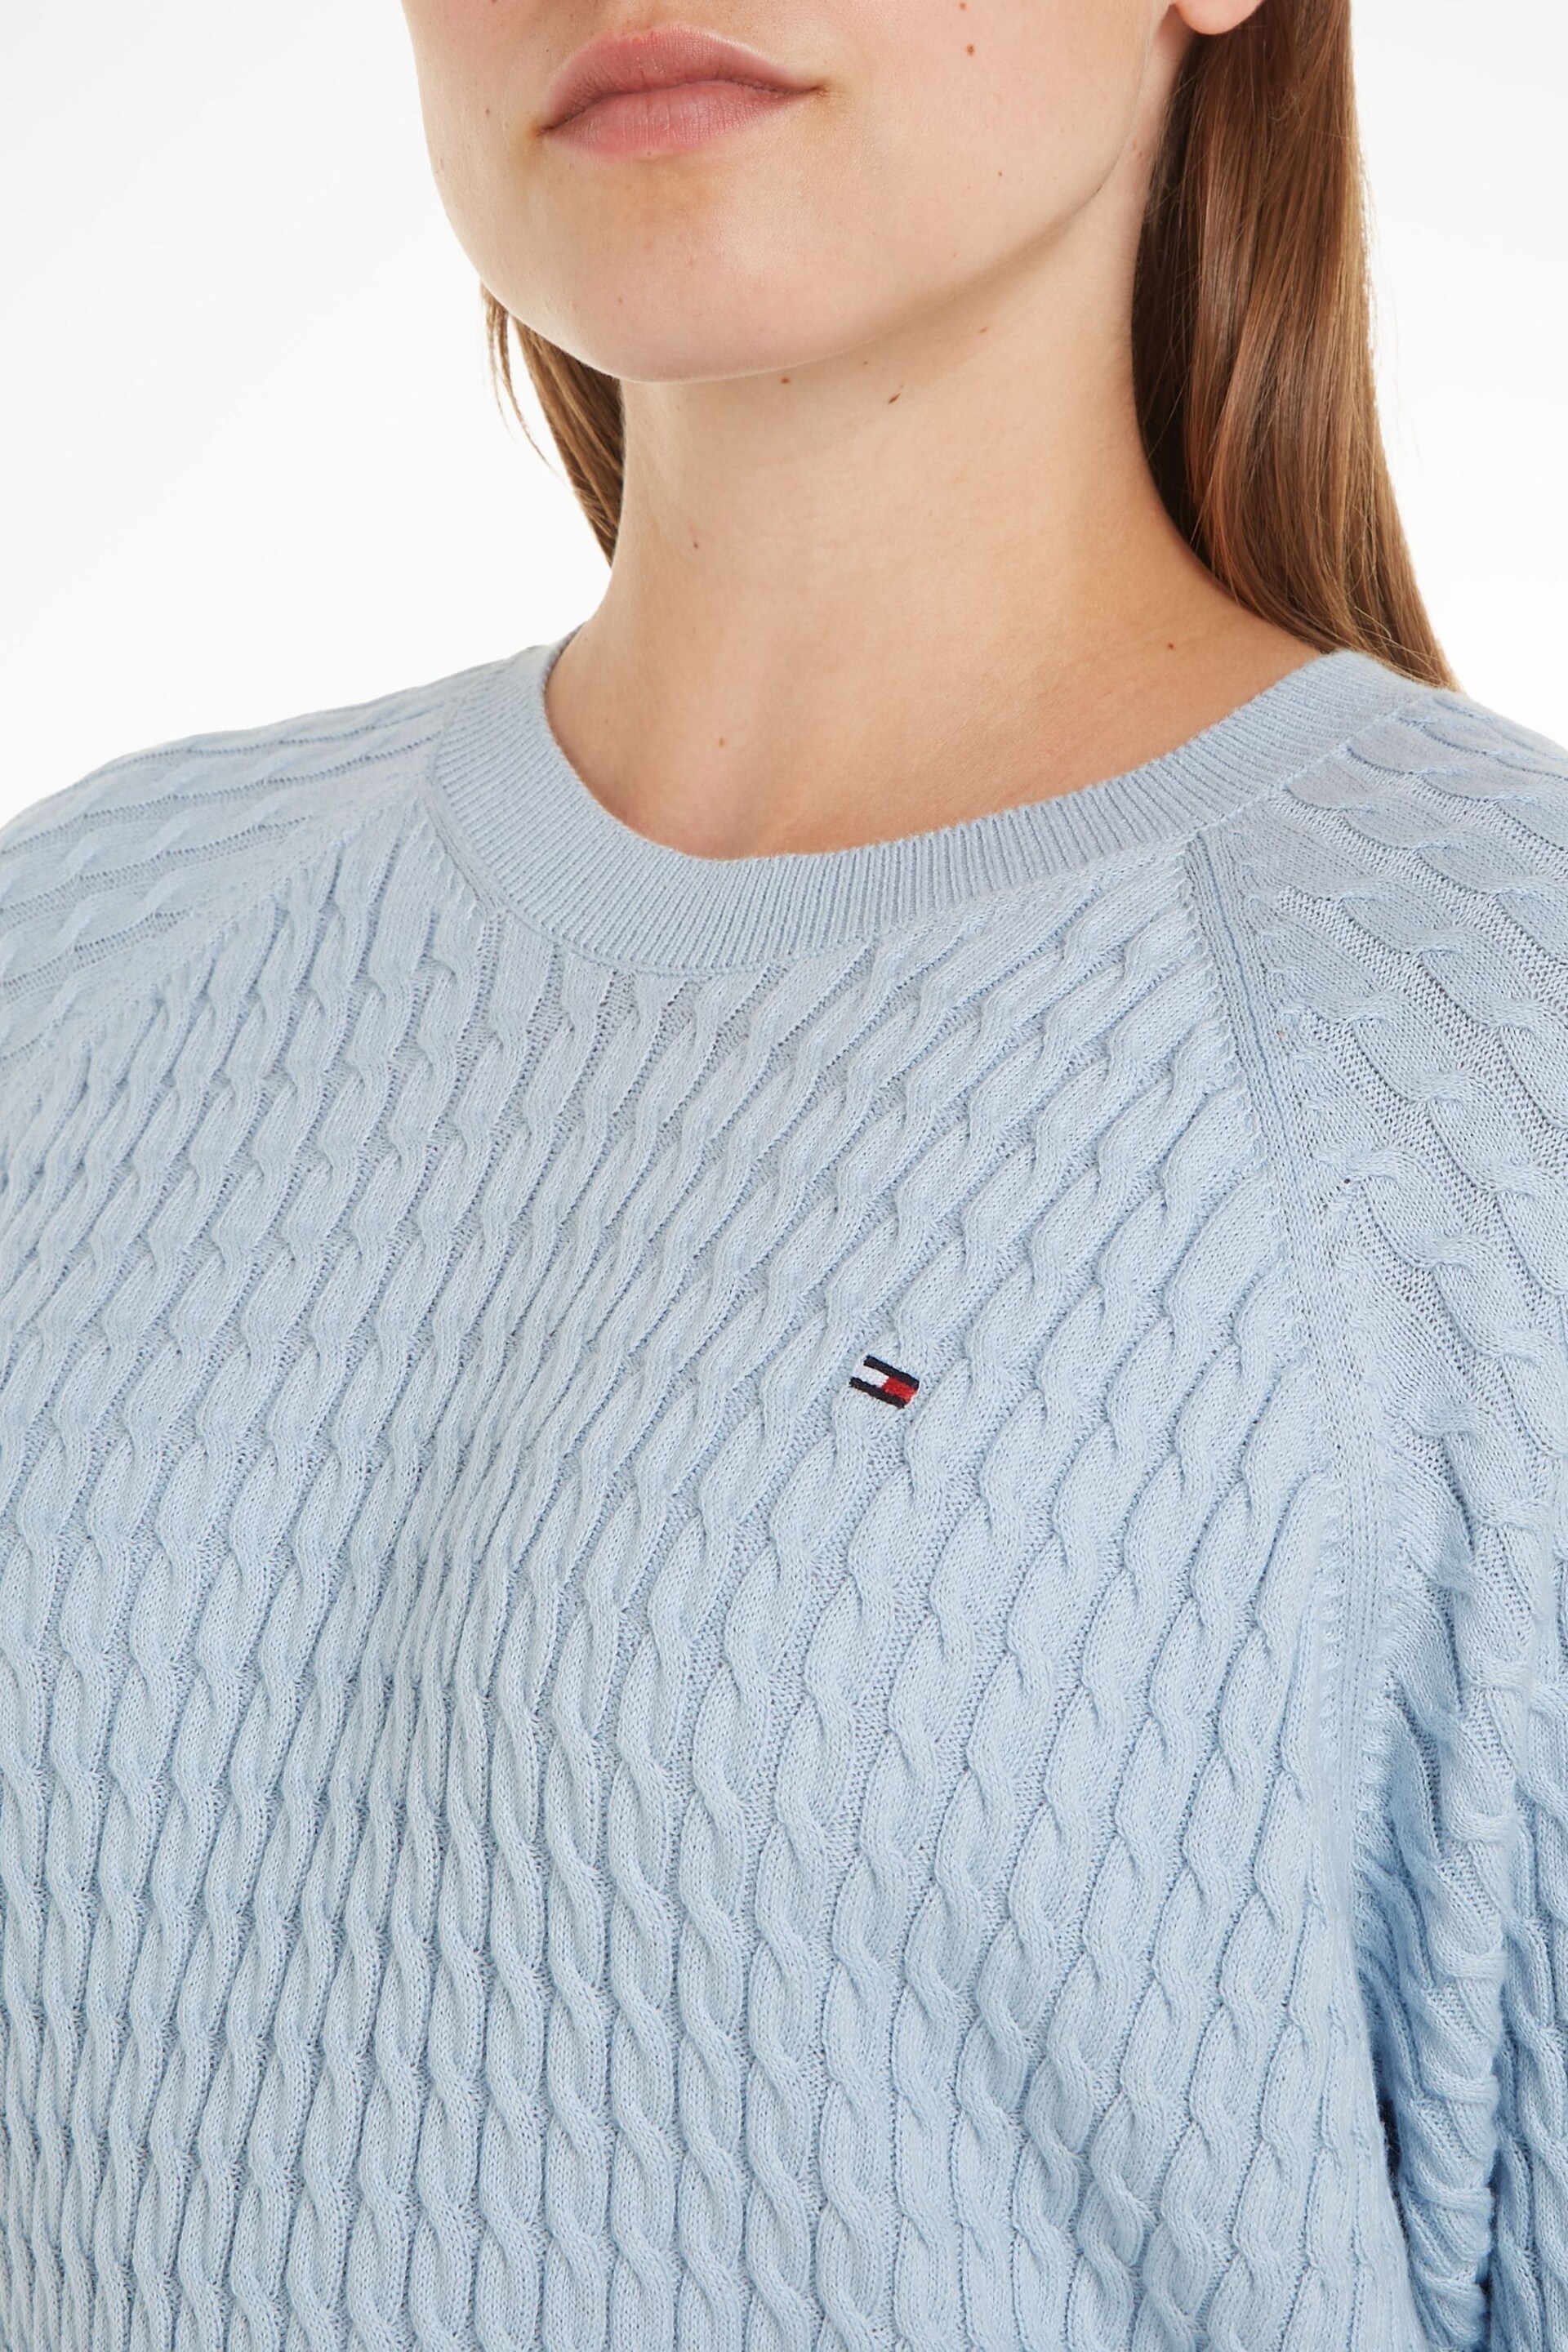 Tommy Hilfiger Blue Cable Knit Sweater - Image 3 of 6